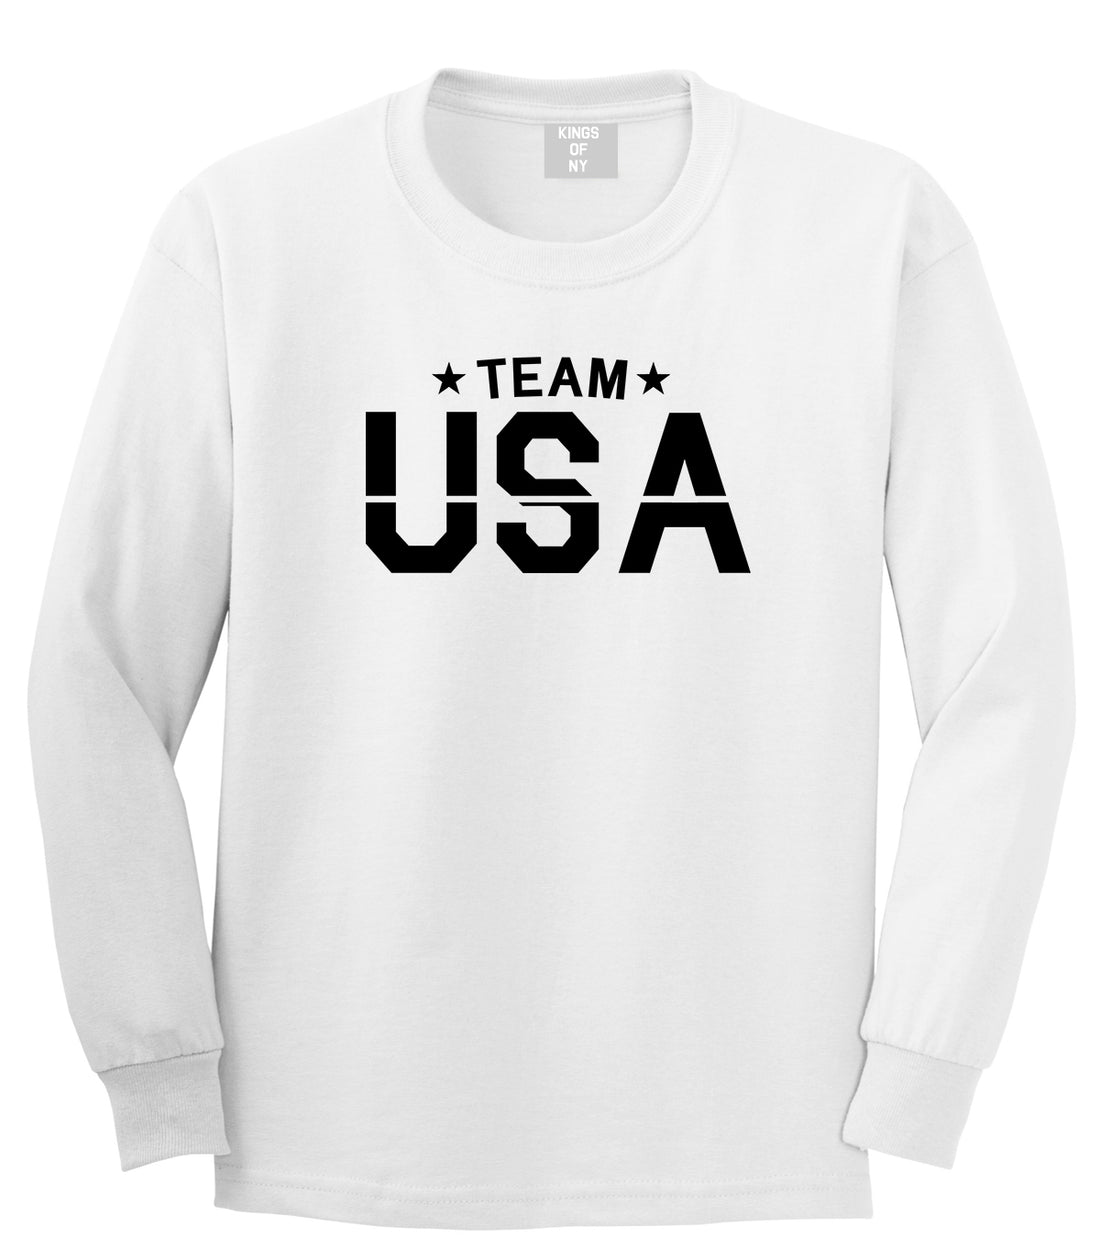 Team USA Mens Long Sleeve T-Shirt White by Kings Of NY